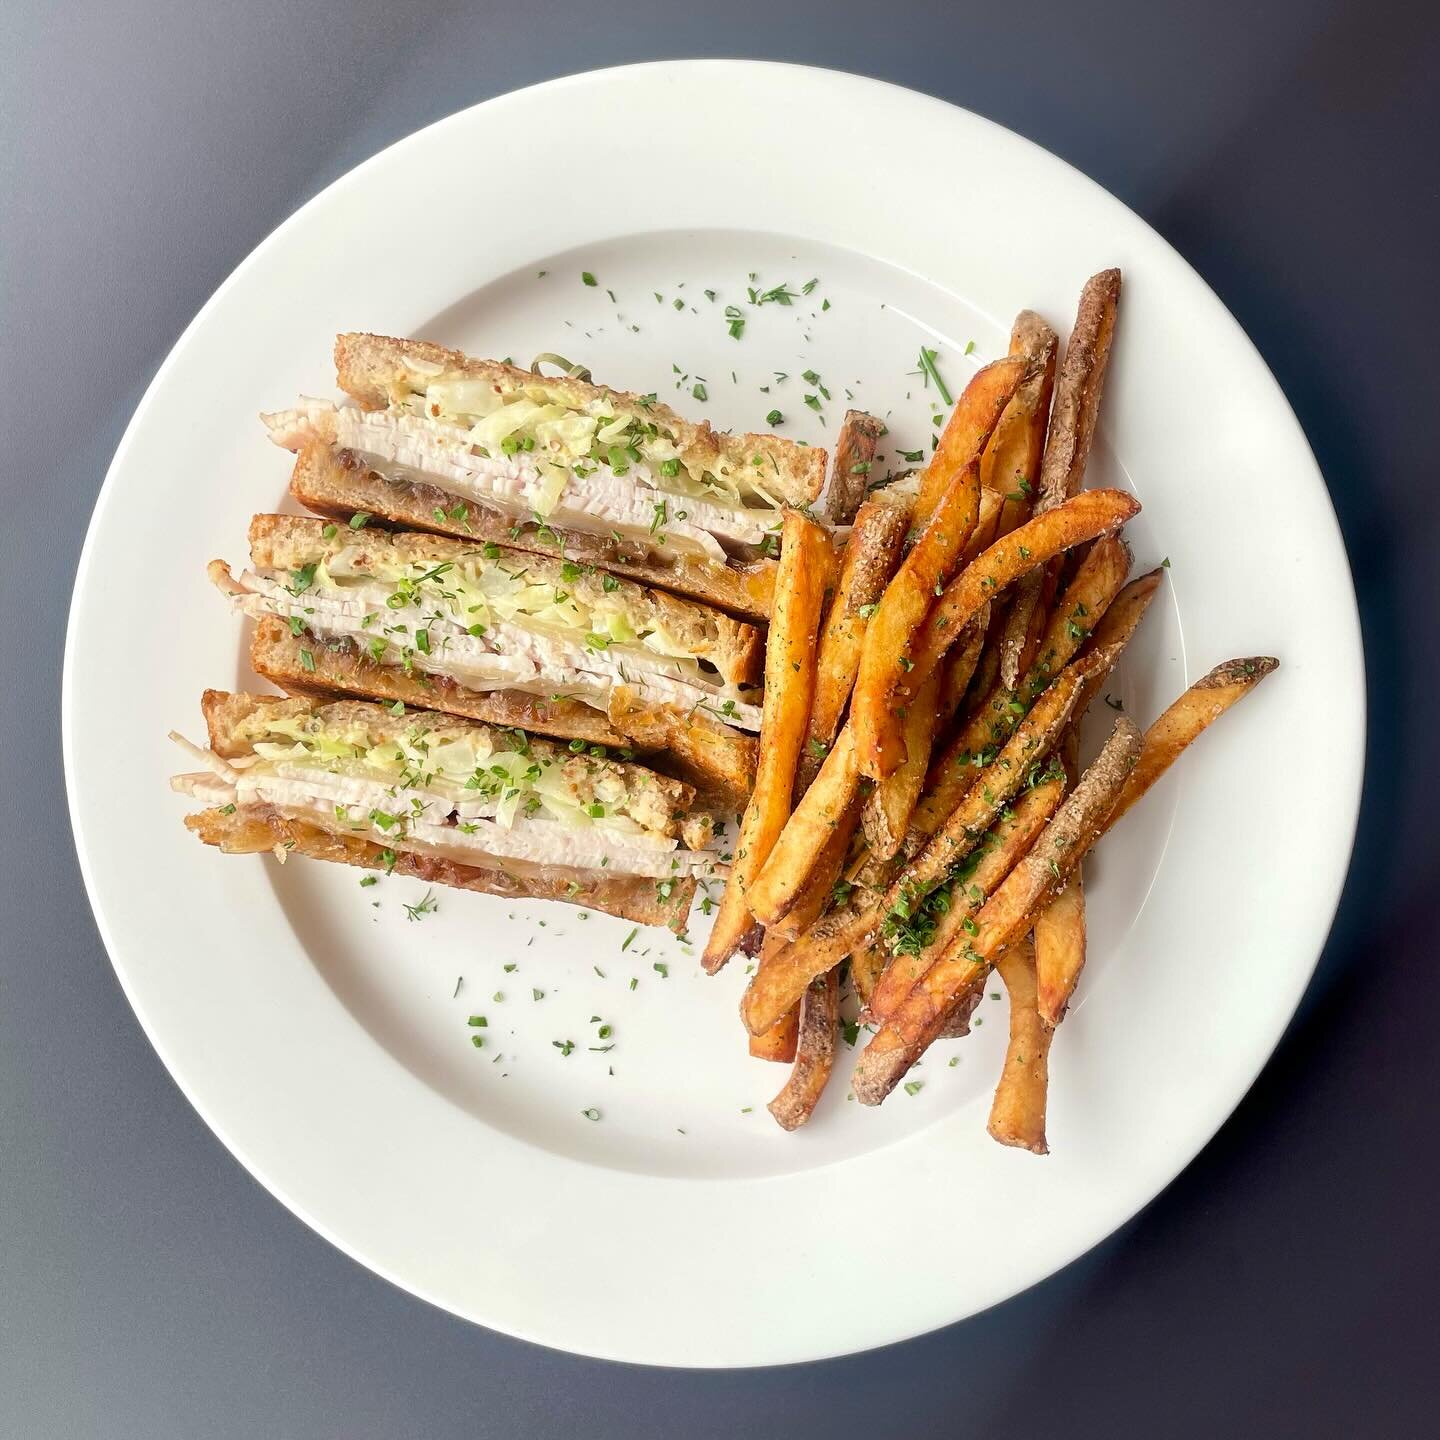 Butter-Roasted Turkey Melt ✨

on farm bread, apple-bacon jam, fontina val d&rsquo;aosta and gruy&egrave;re cheeses, 1900 sauerkraut, dijonnaise, side of fresh herbed french fries

Lunch menu only 

📸 @branpanobread #tra1900 #1900bldg